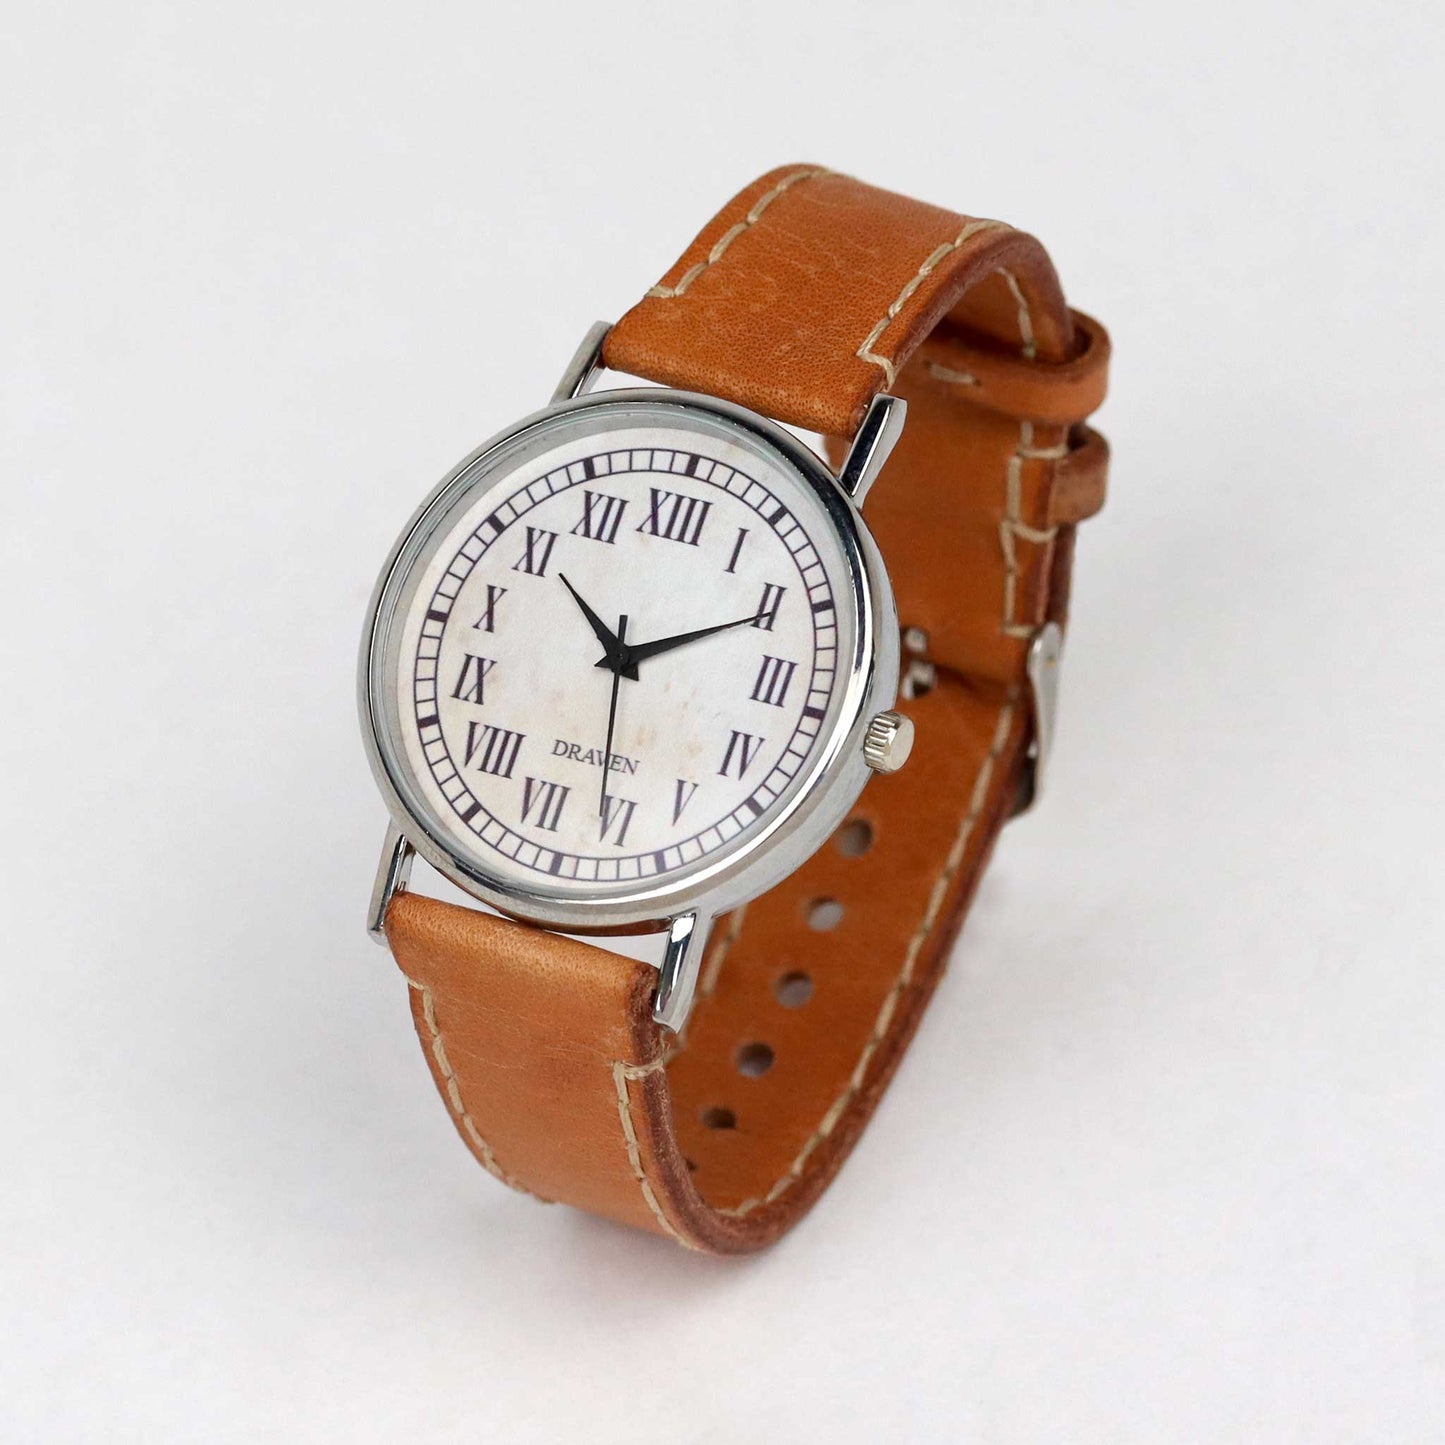 side view of a thirteen hour wrist watch with brown strap